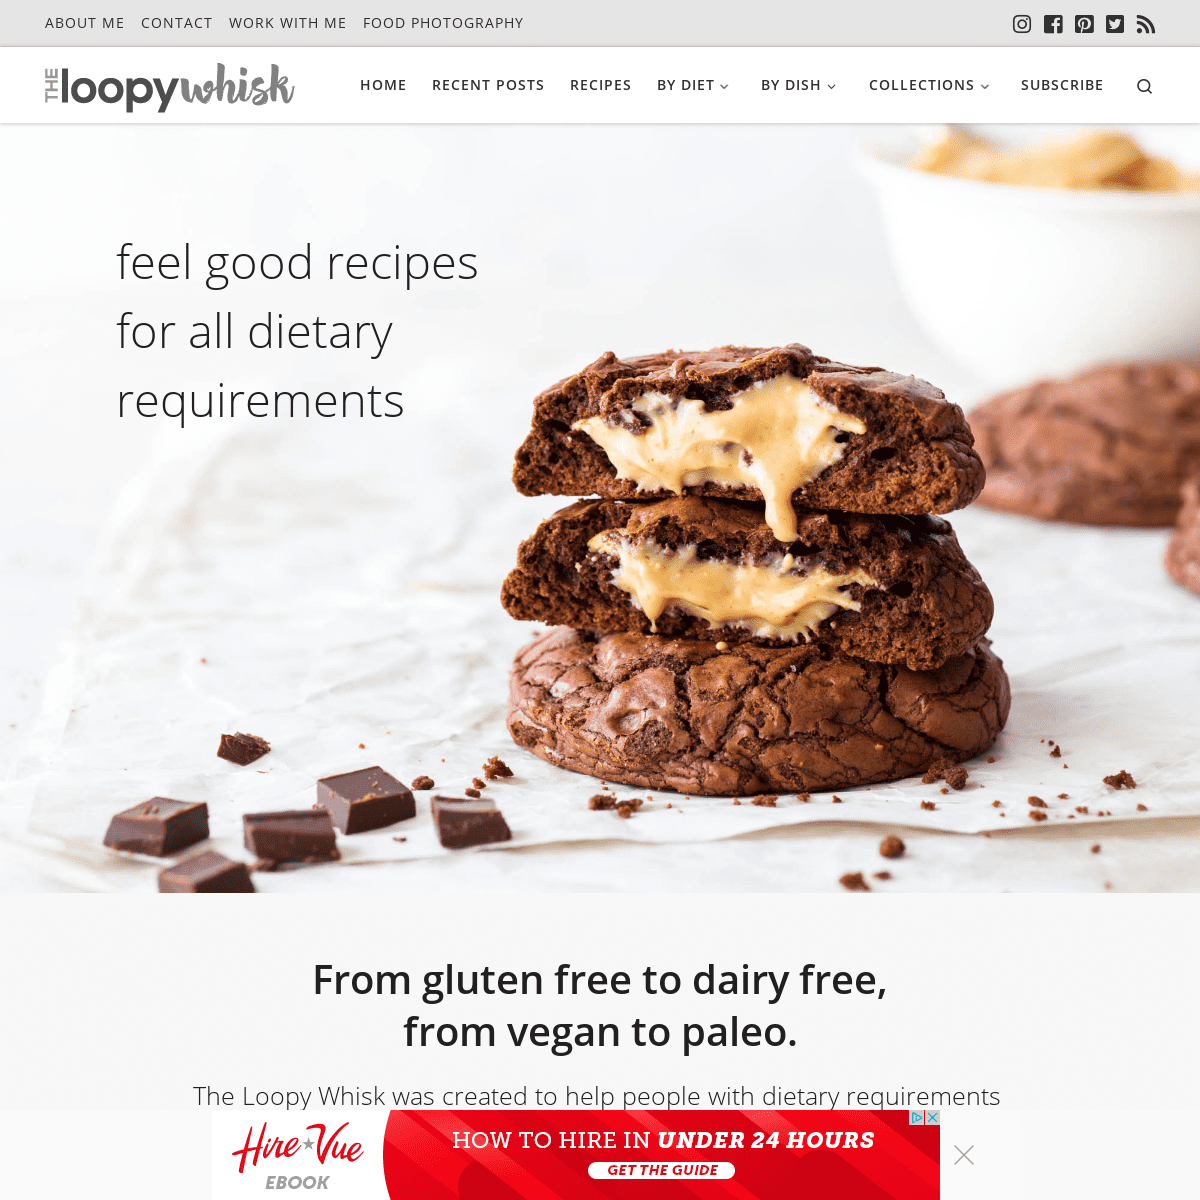 A complete backup of theloopywhisk.com